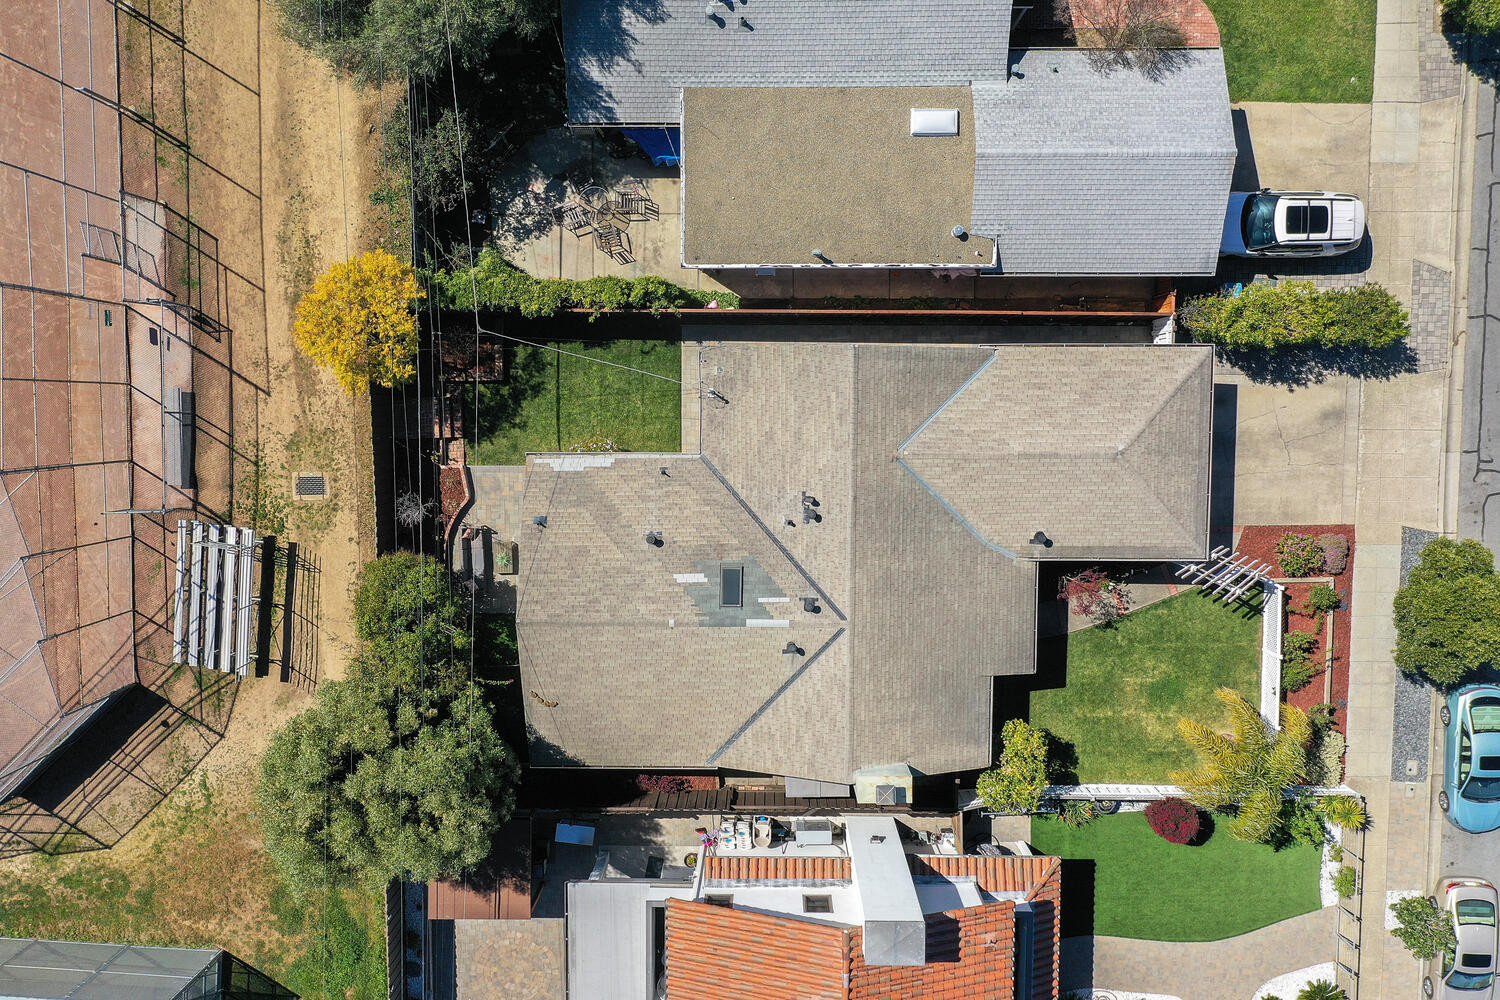 515 Cambridge Street aerial view of the roof.